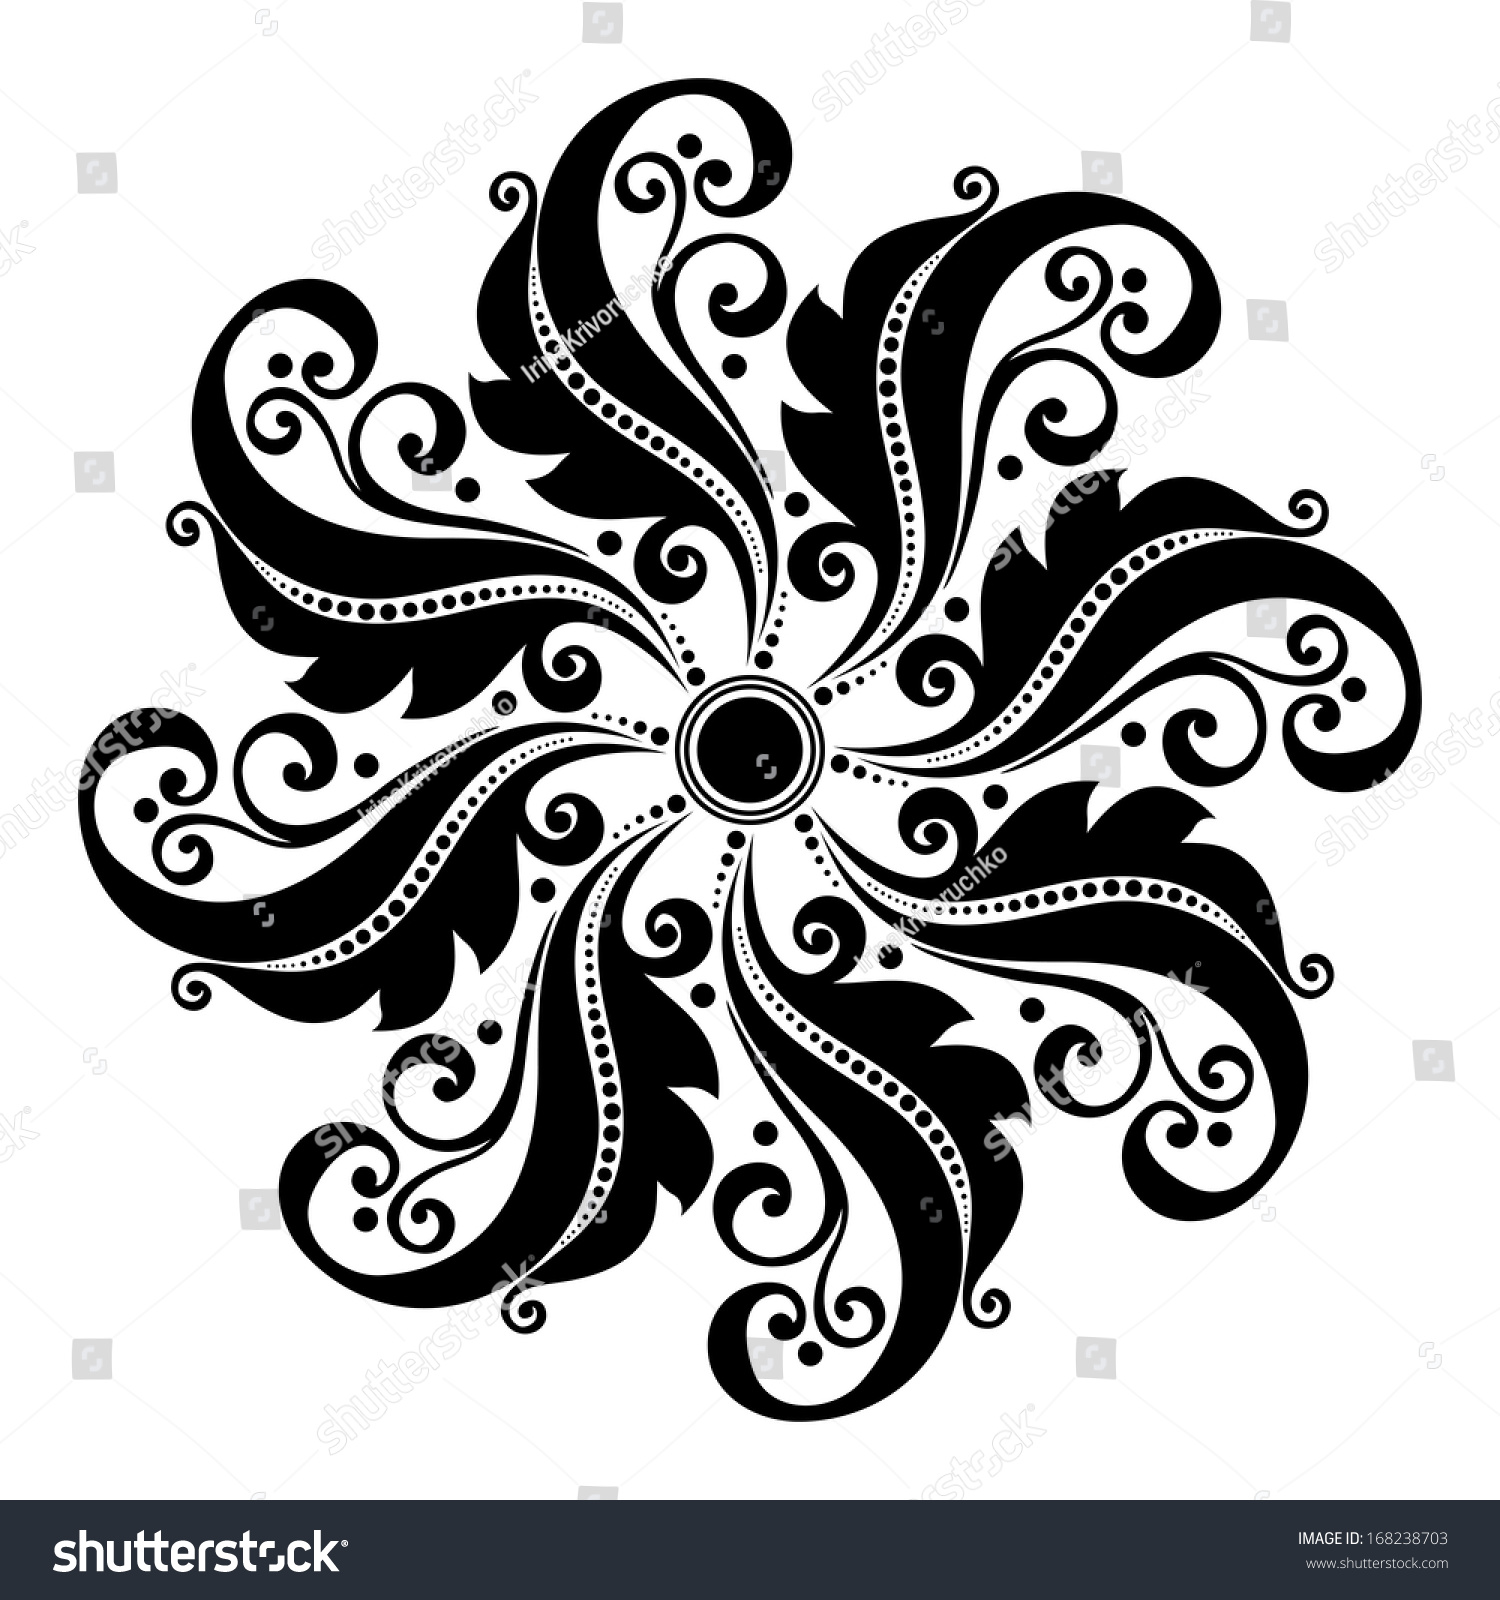 Beautiful Deco Circle (Vector), Patterned Design - 168238703 : Shutterstock